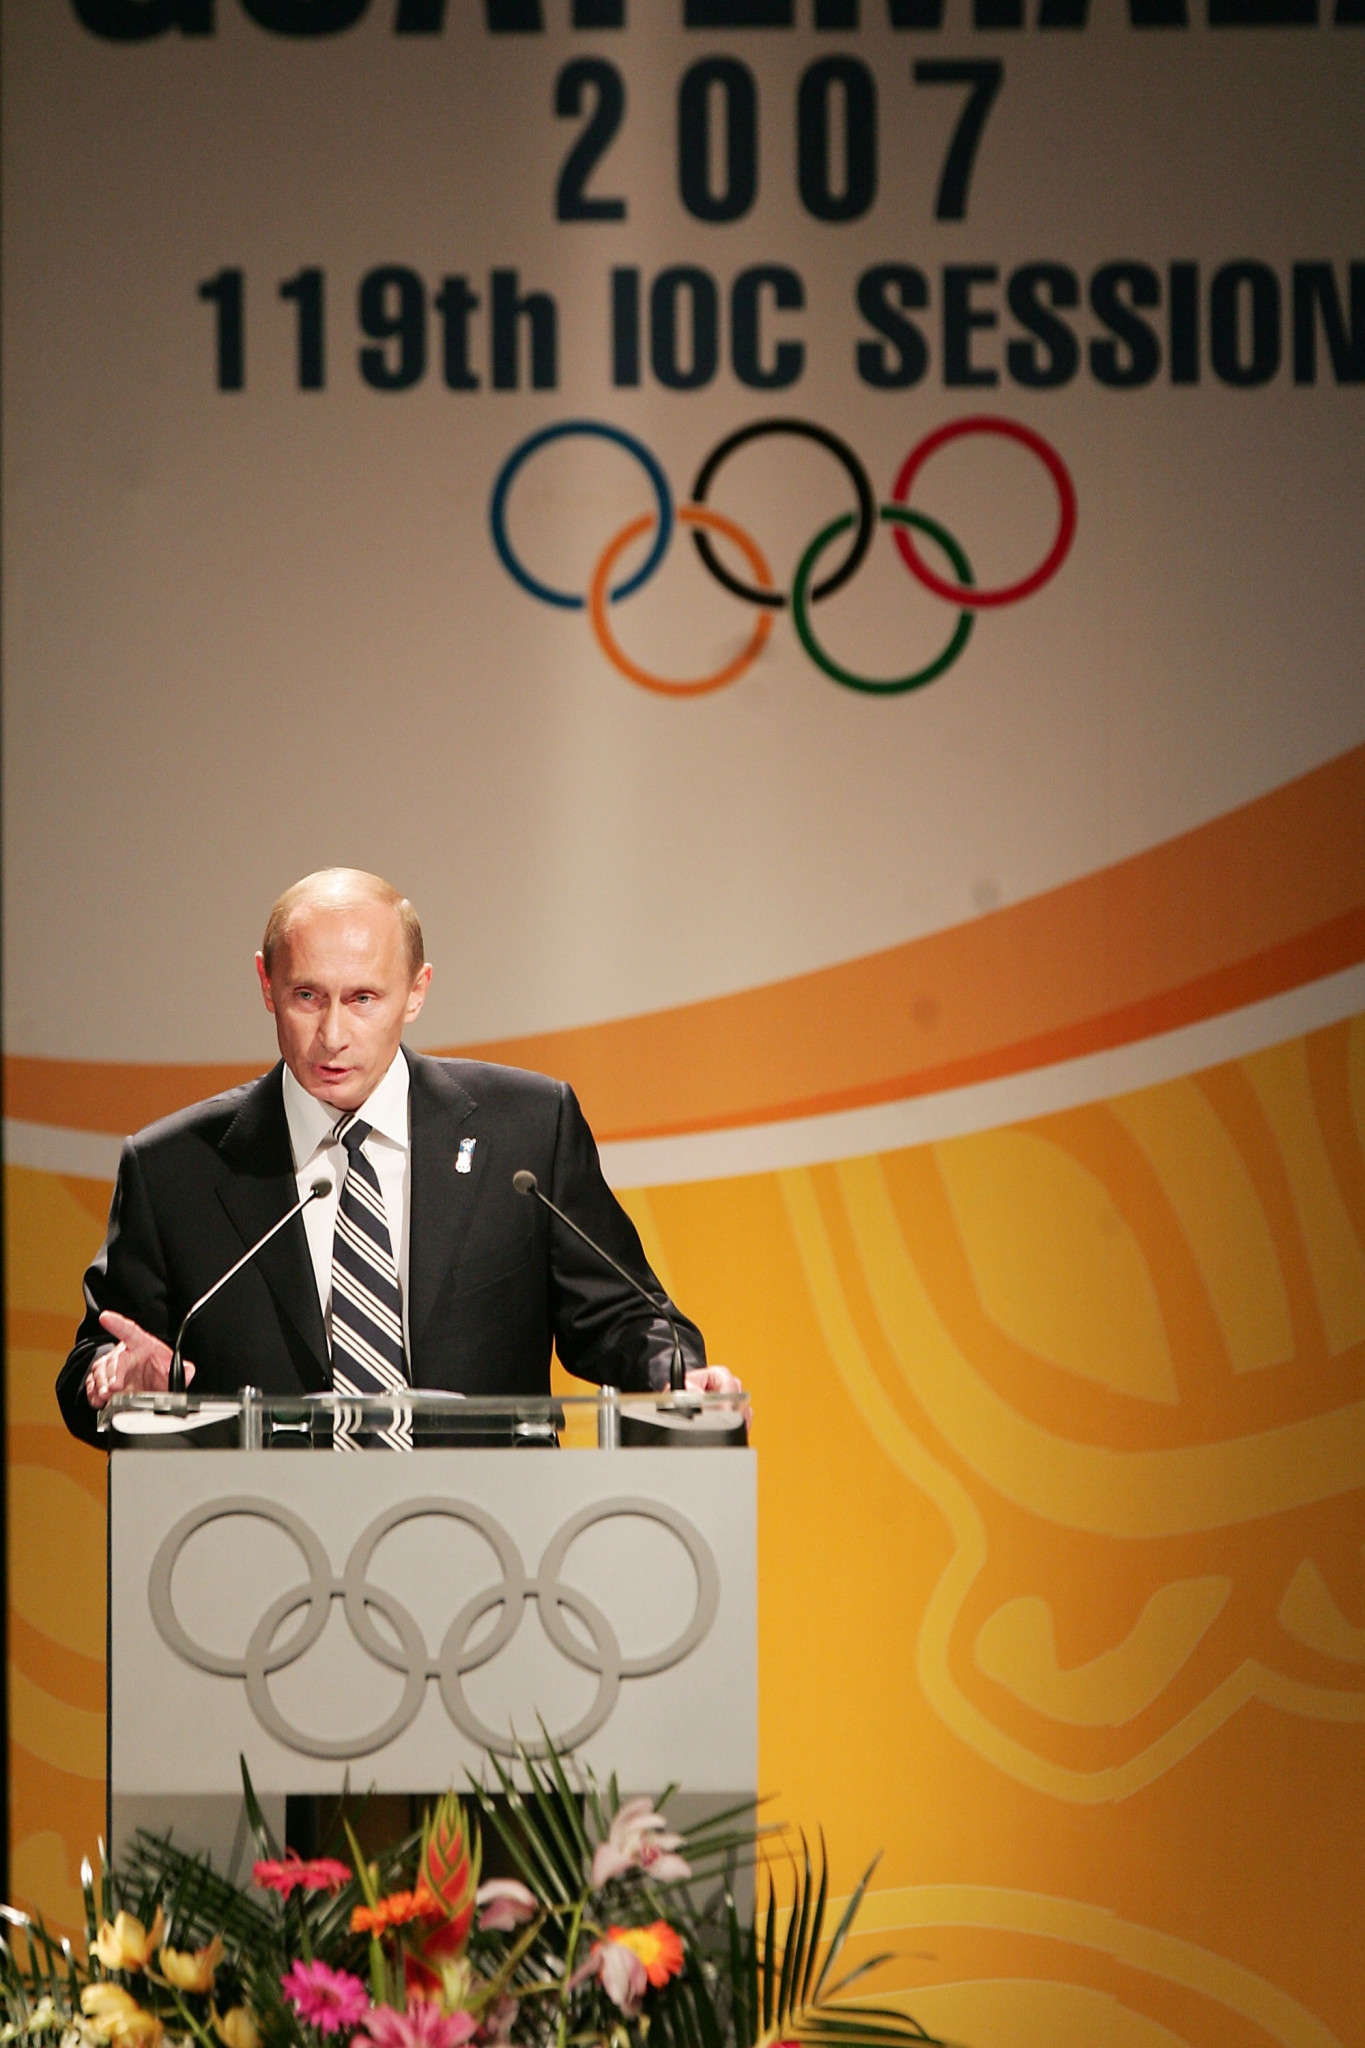 Vladimir Putin pictured speaking in favour of Sochi at the 2007 IOC Session in Guatemala ©Getty Images